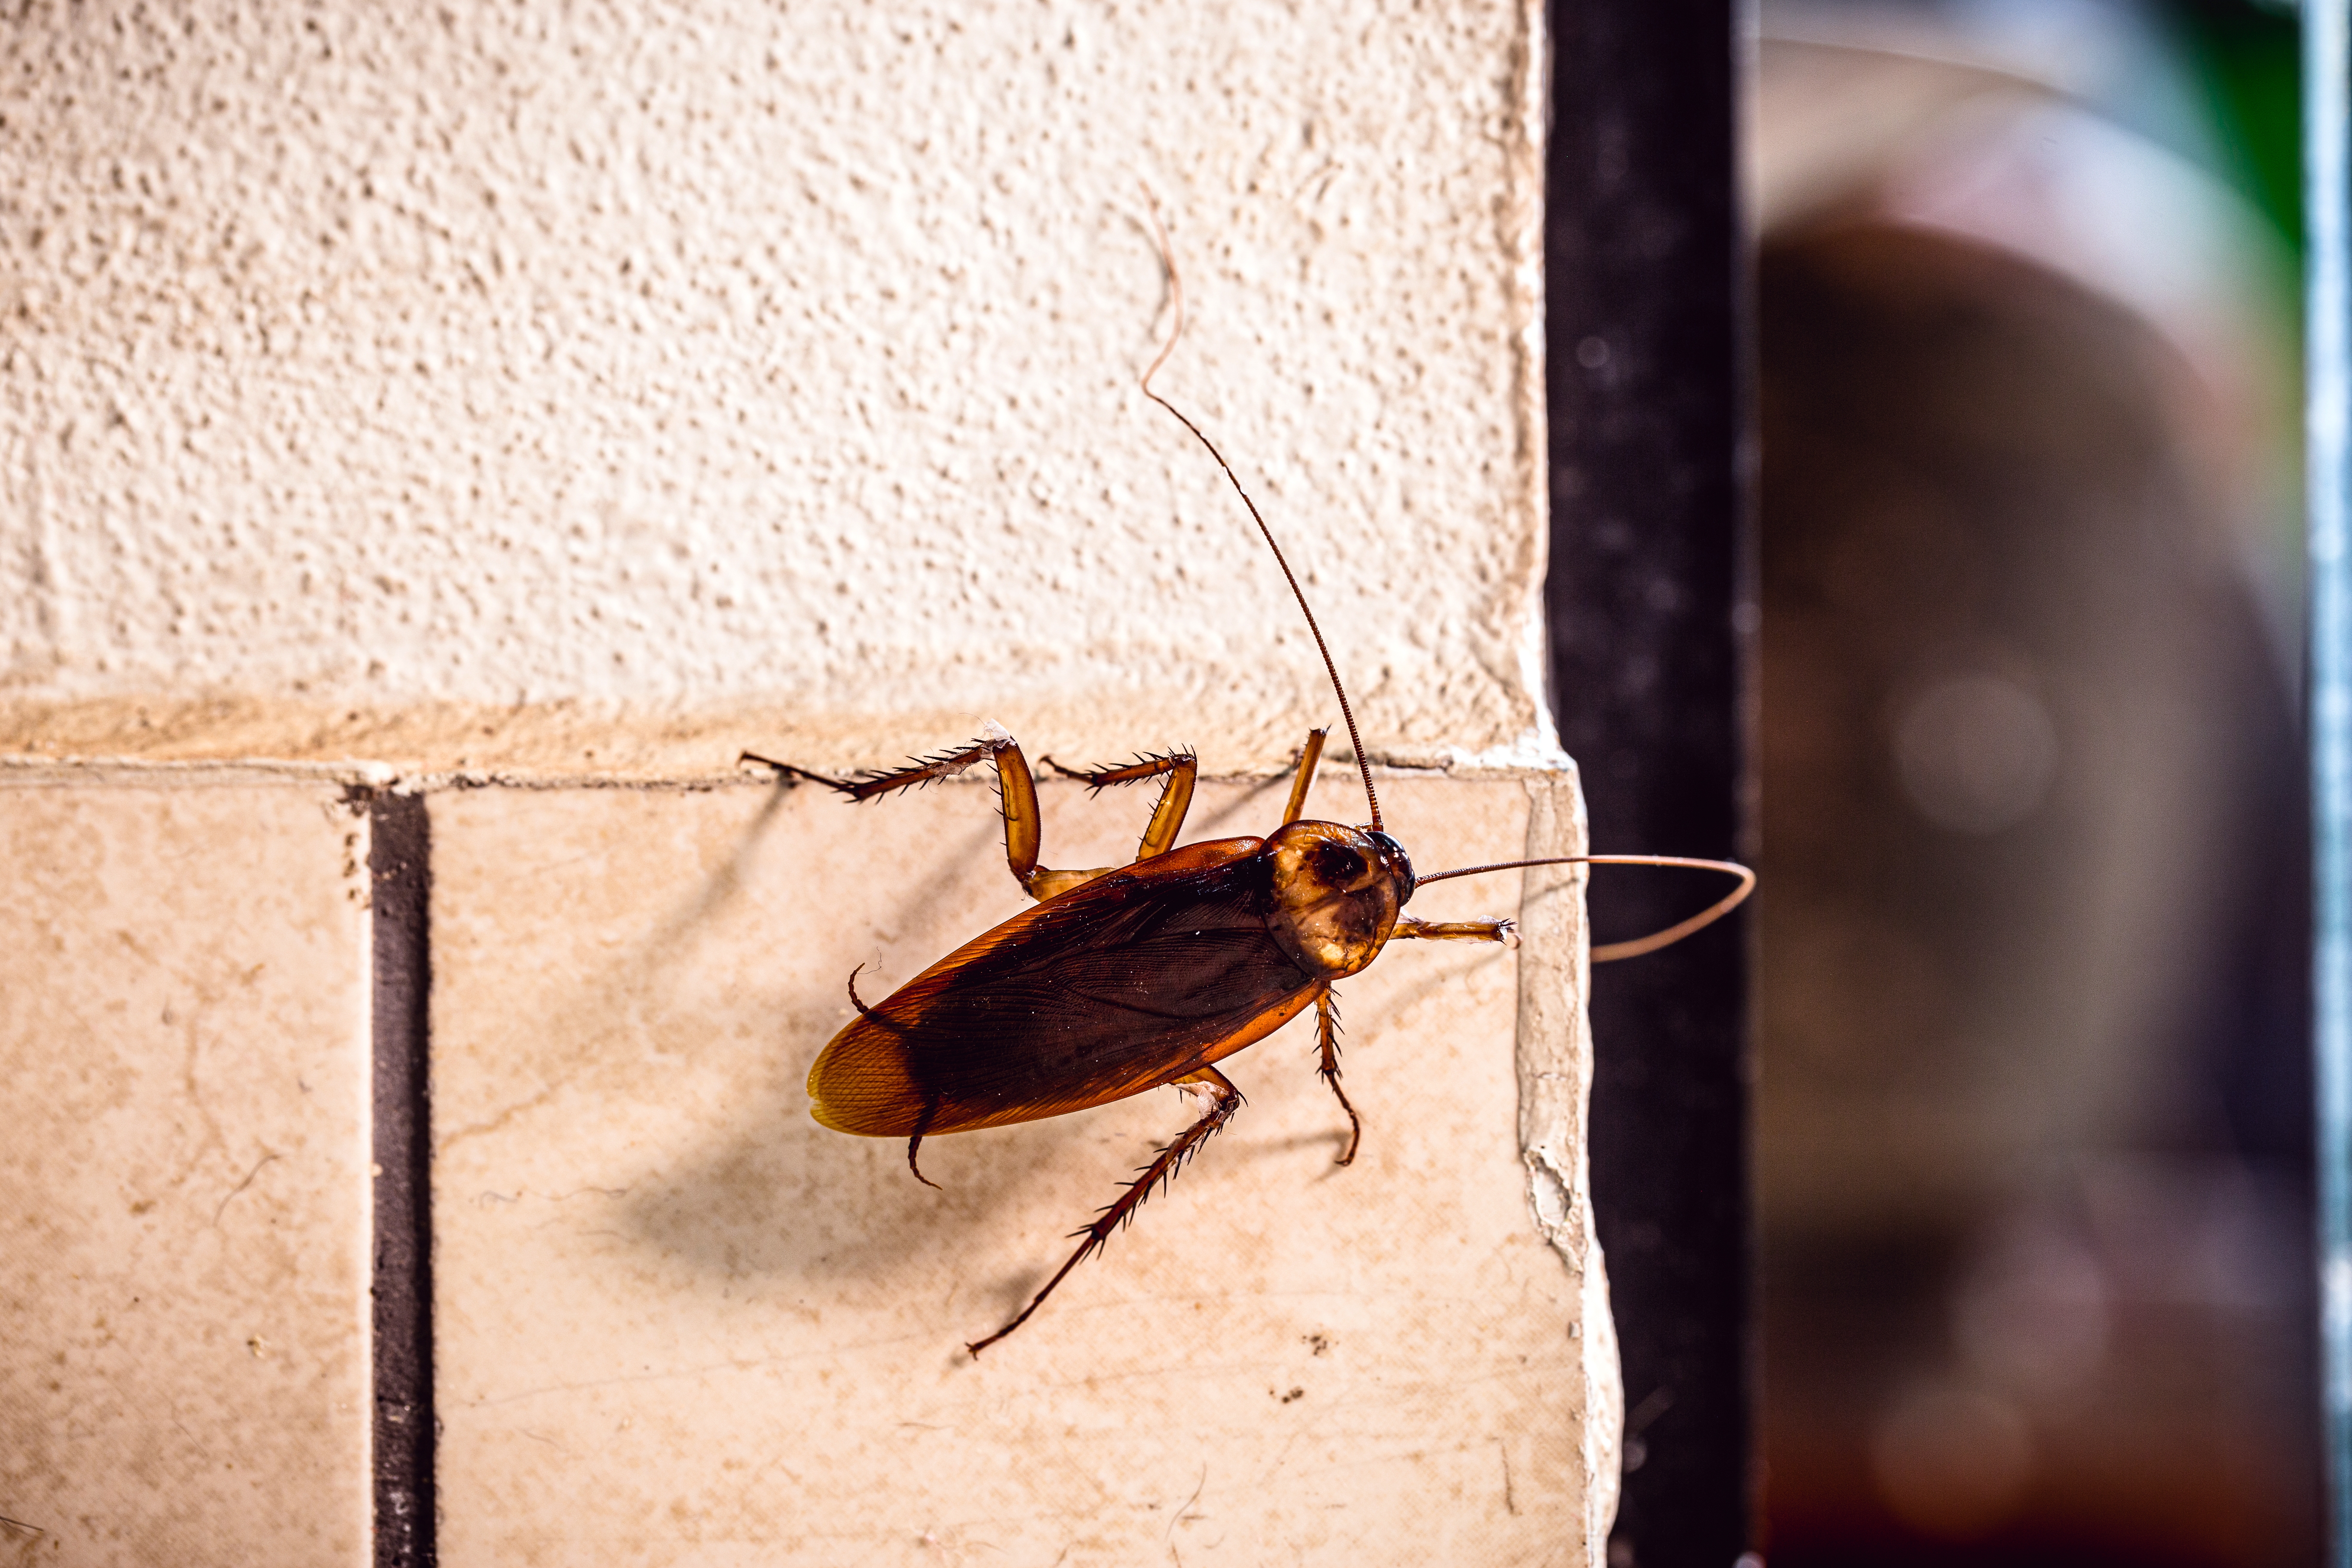 A cockroach crawls along the wall of a house | Source: Shutterstock